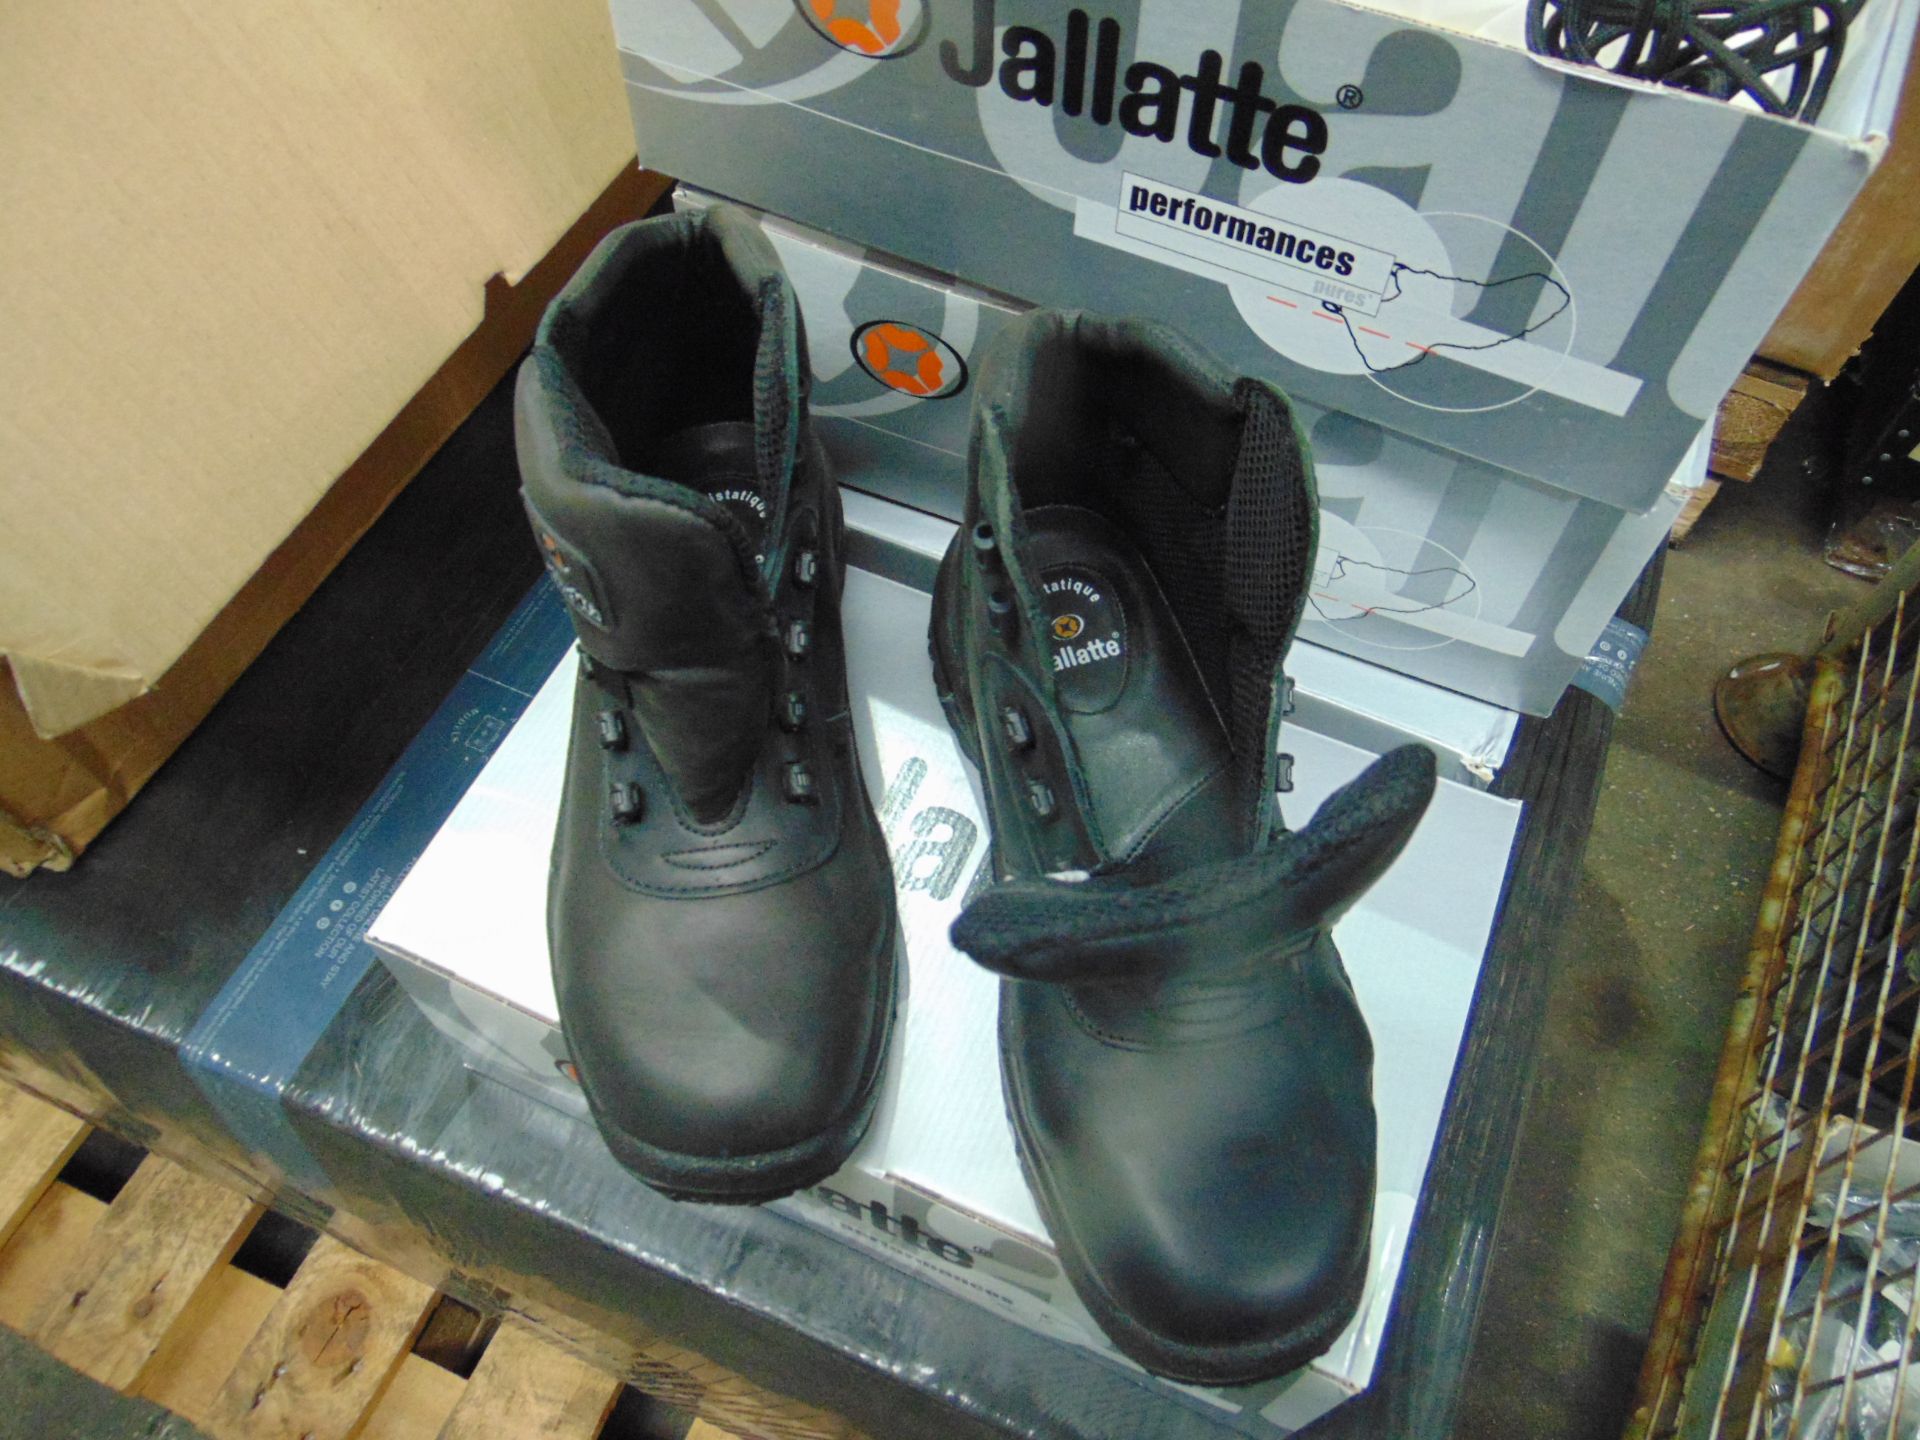 4 PAIRS NEW UNISSUED JALLETTE SAFETY BOOTS SIZE: 40/ or 6 1/2 - Image 4 of 4